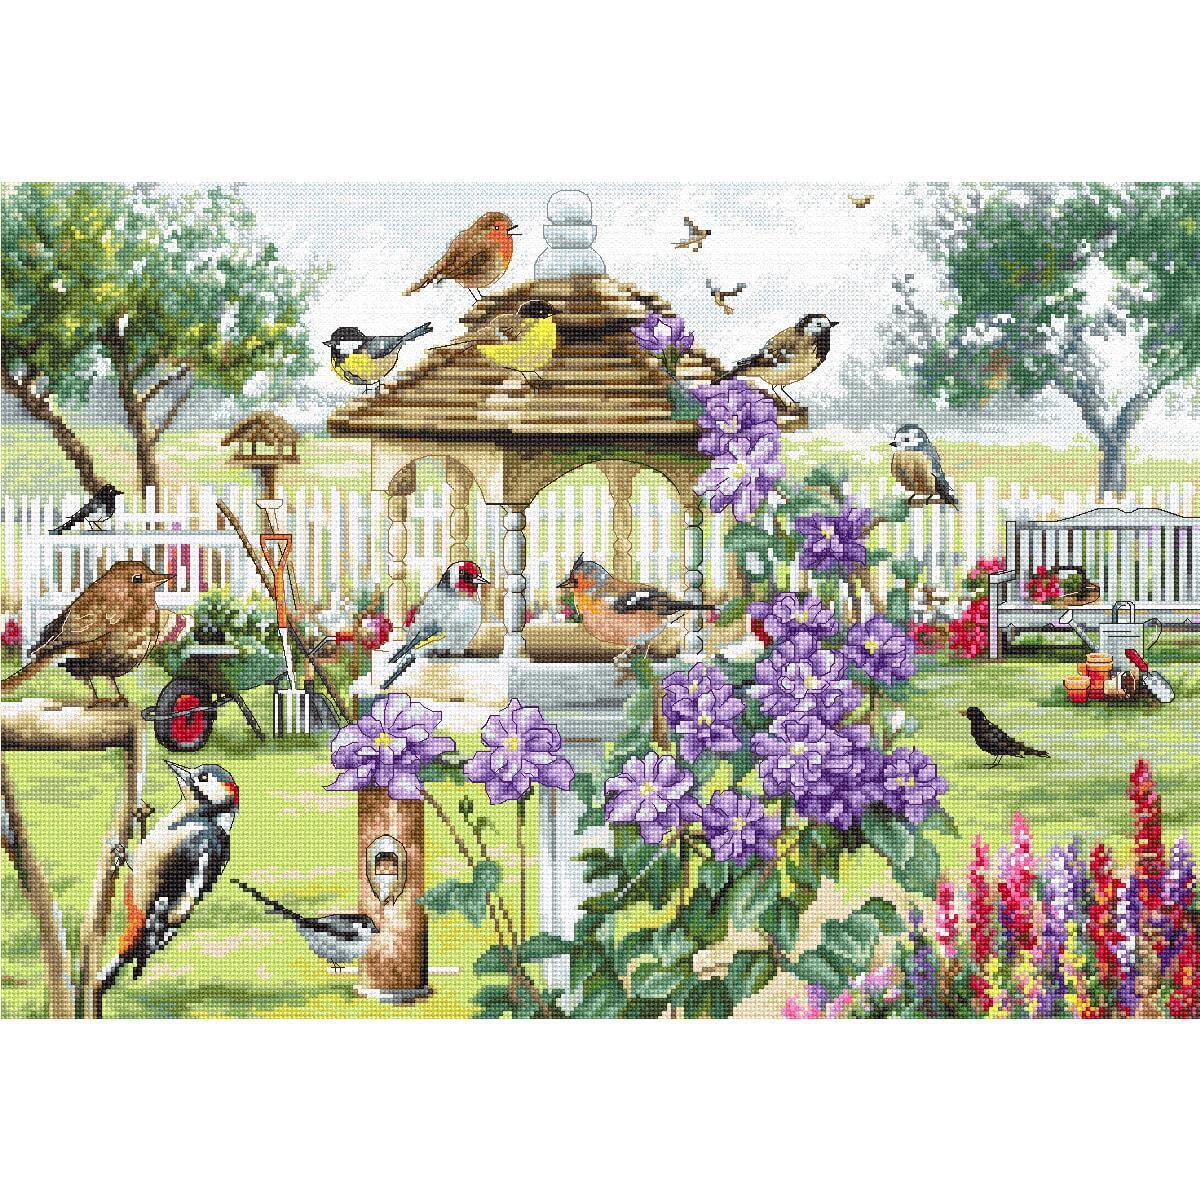 A lively garden scene with various birds sitting around a...